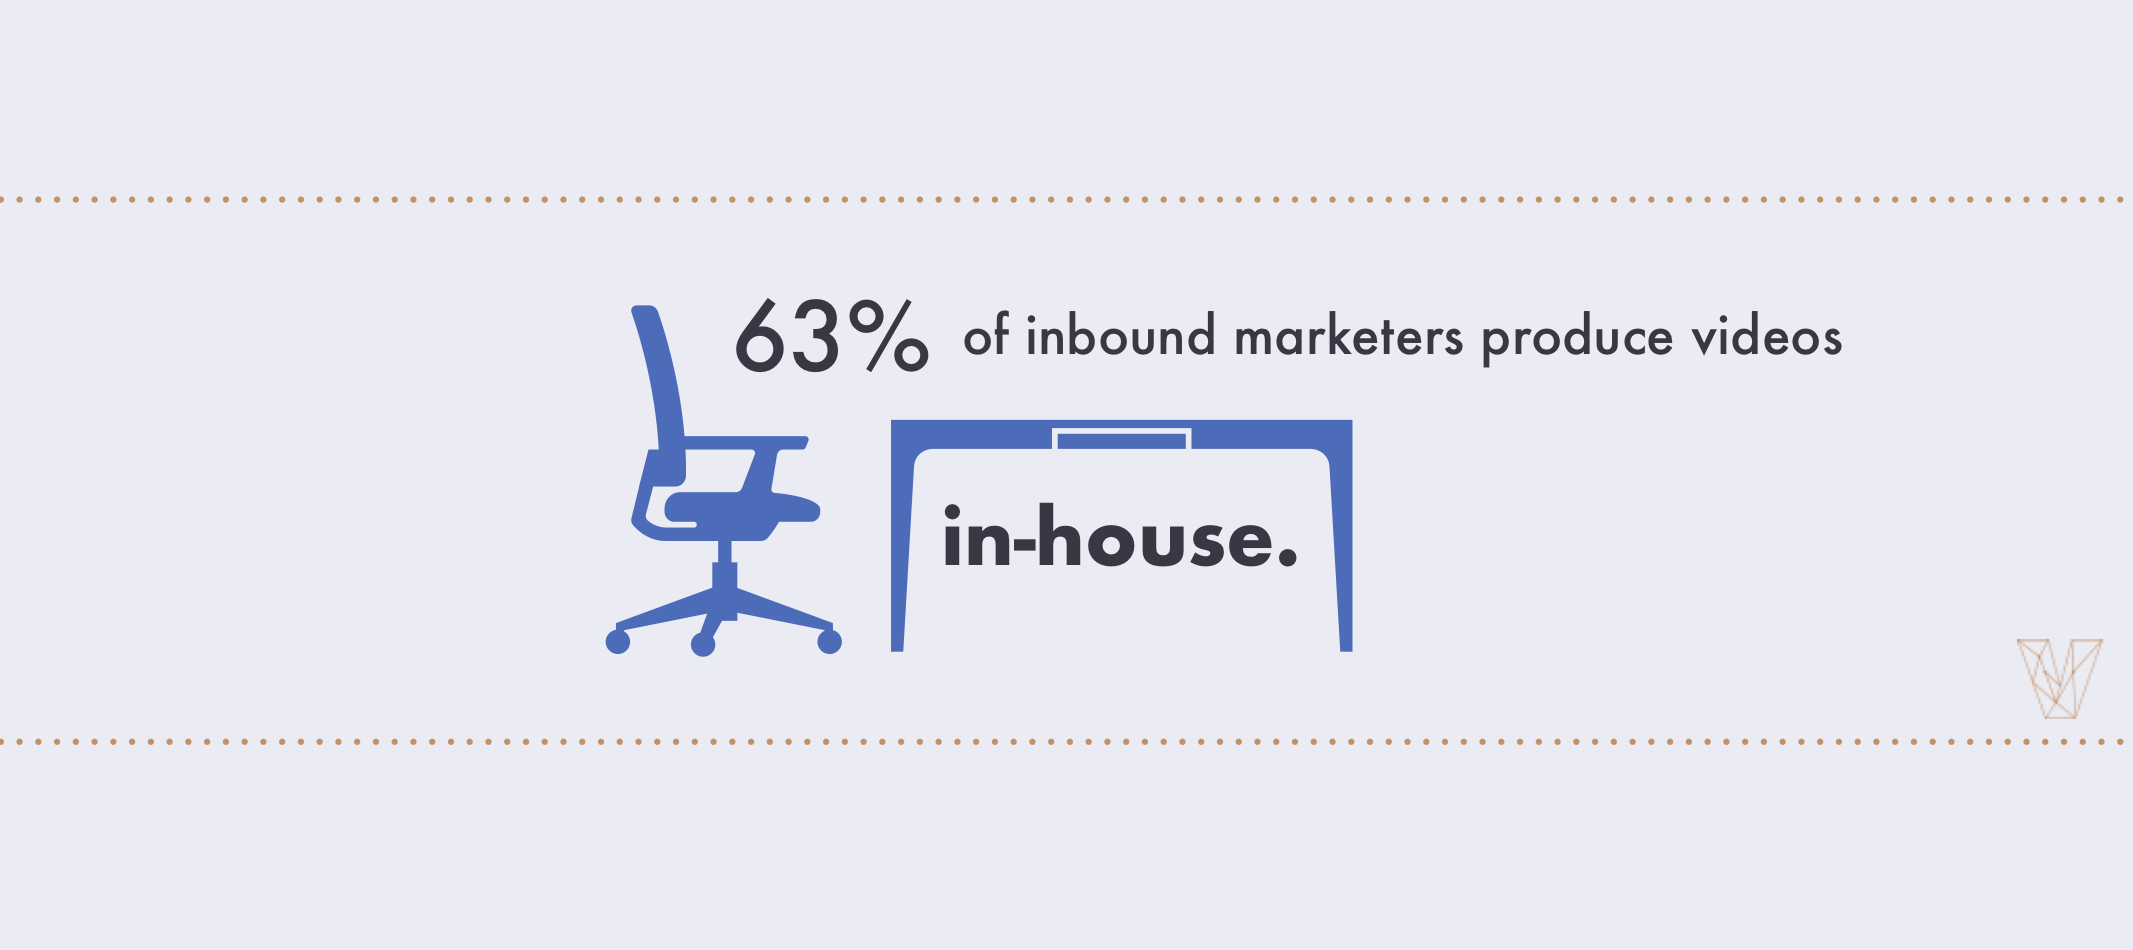 63% of inbound marketers produce videos in-house